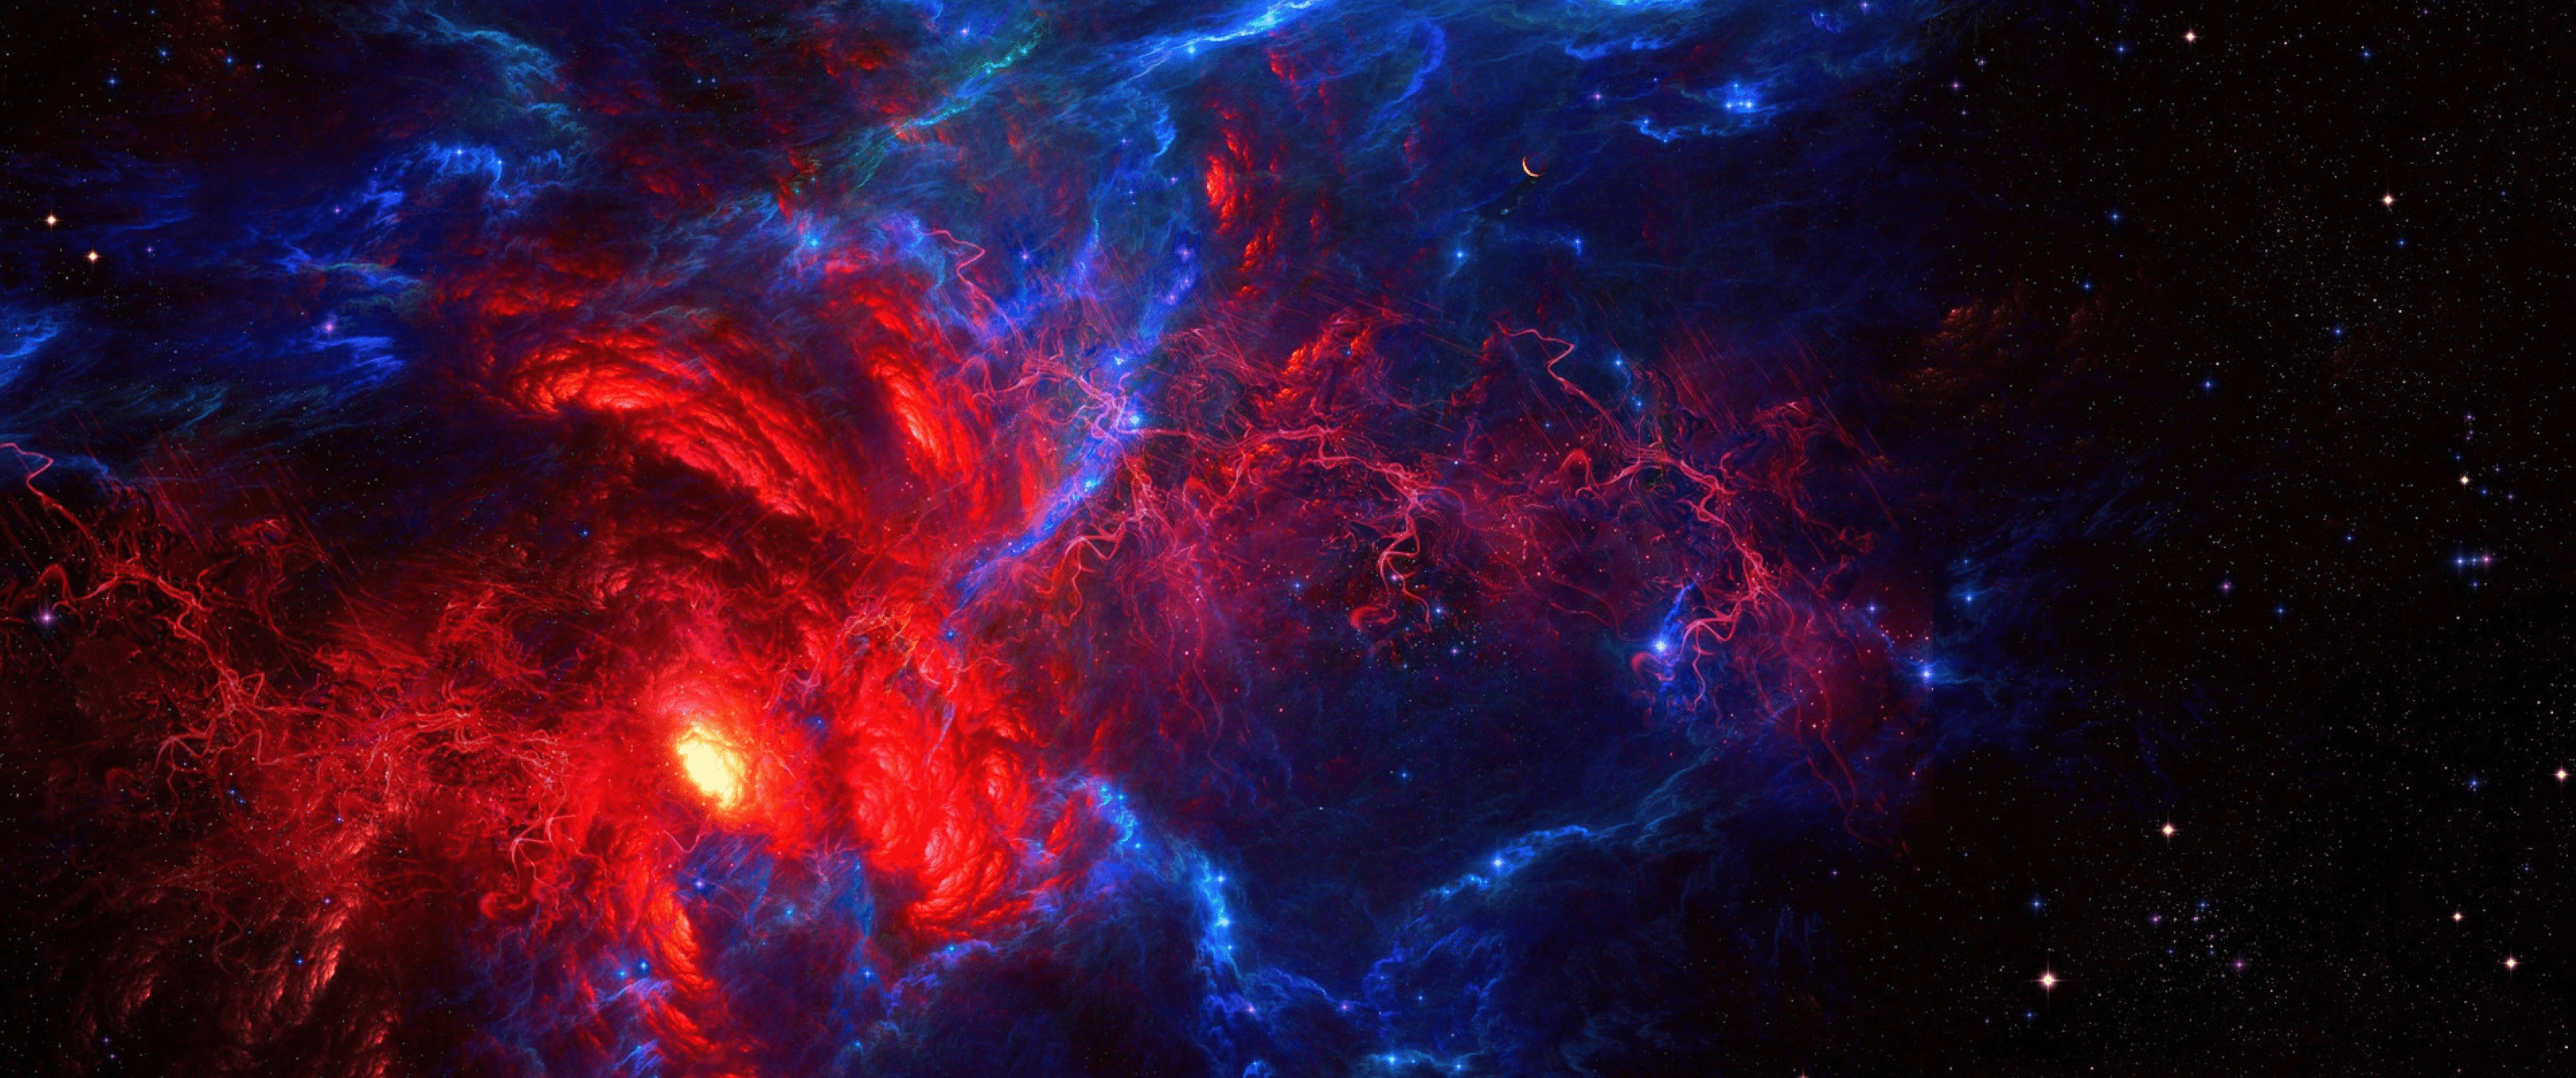 An image of a nebula with red and blue colors. - 3440x1440